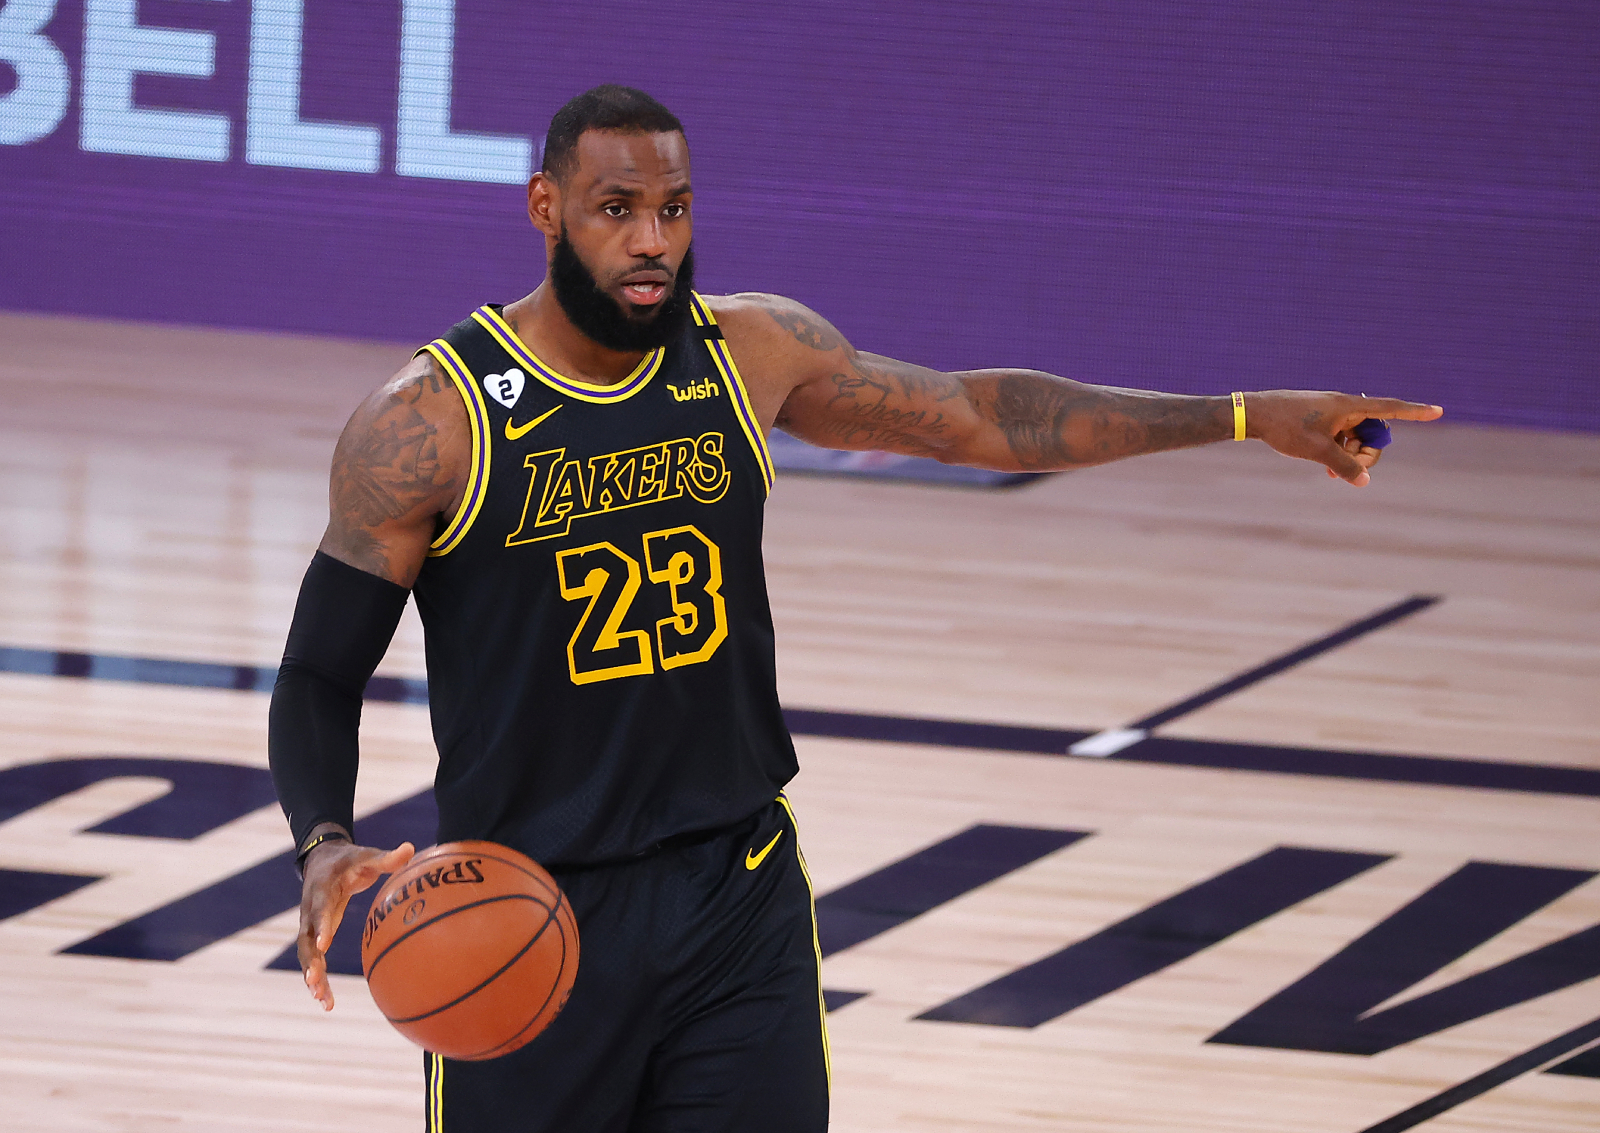 LeBron James has always dealt with critics. Now, as he and the Lakers try to get to the Finals, he has a brutally honest message about them.